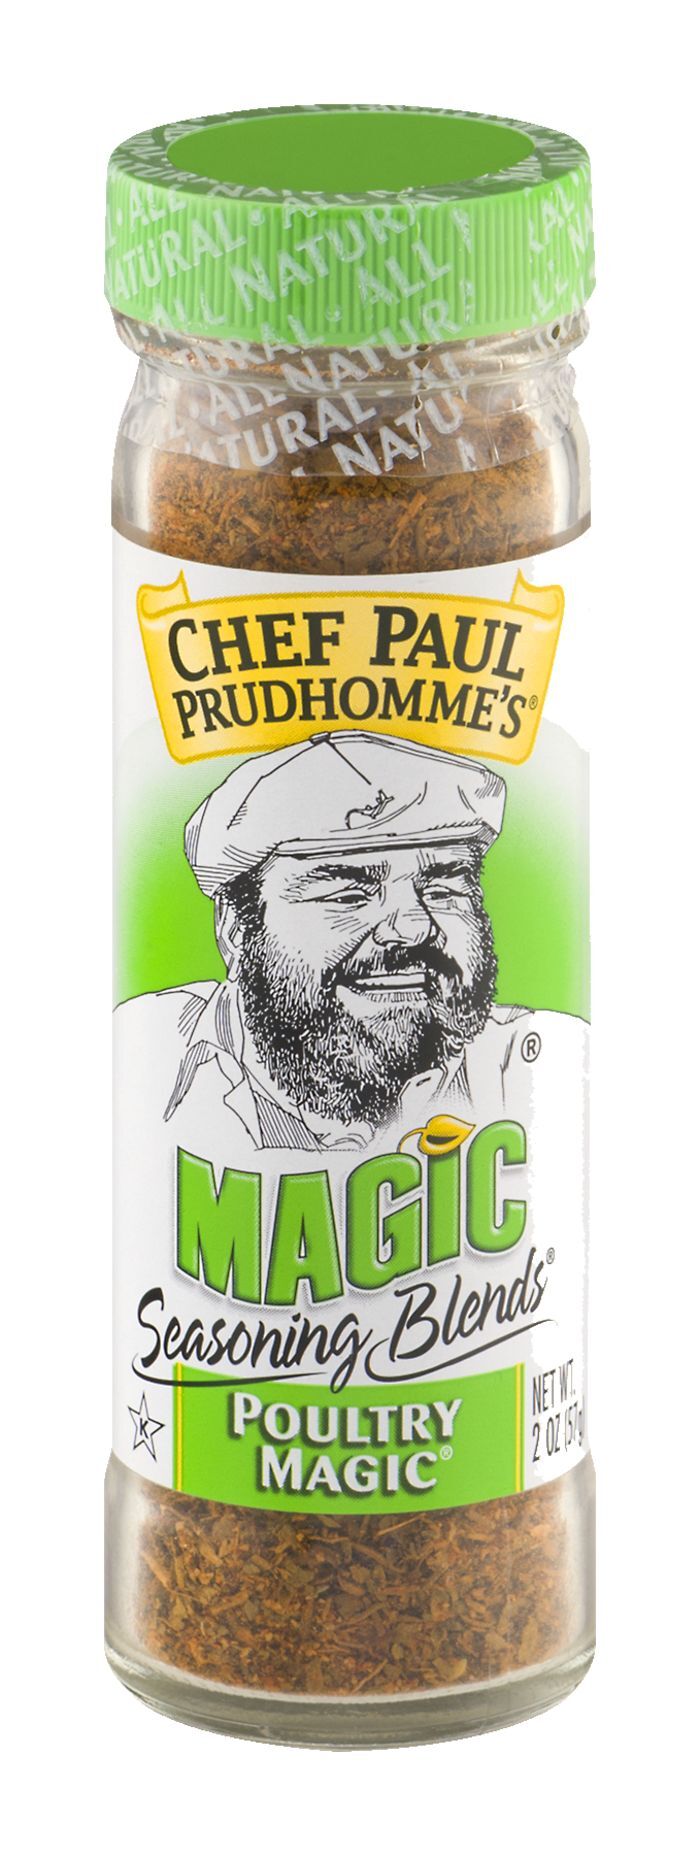 Chef Paul Prudhommes Magic Seasoning Blends, Poultry Magic